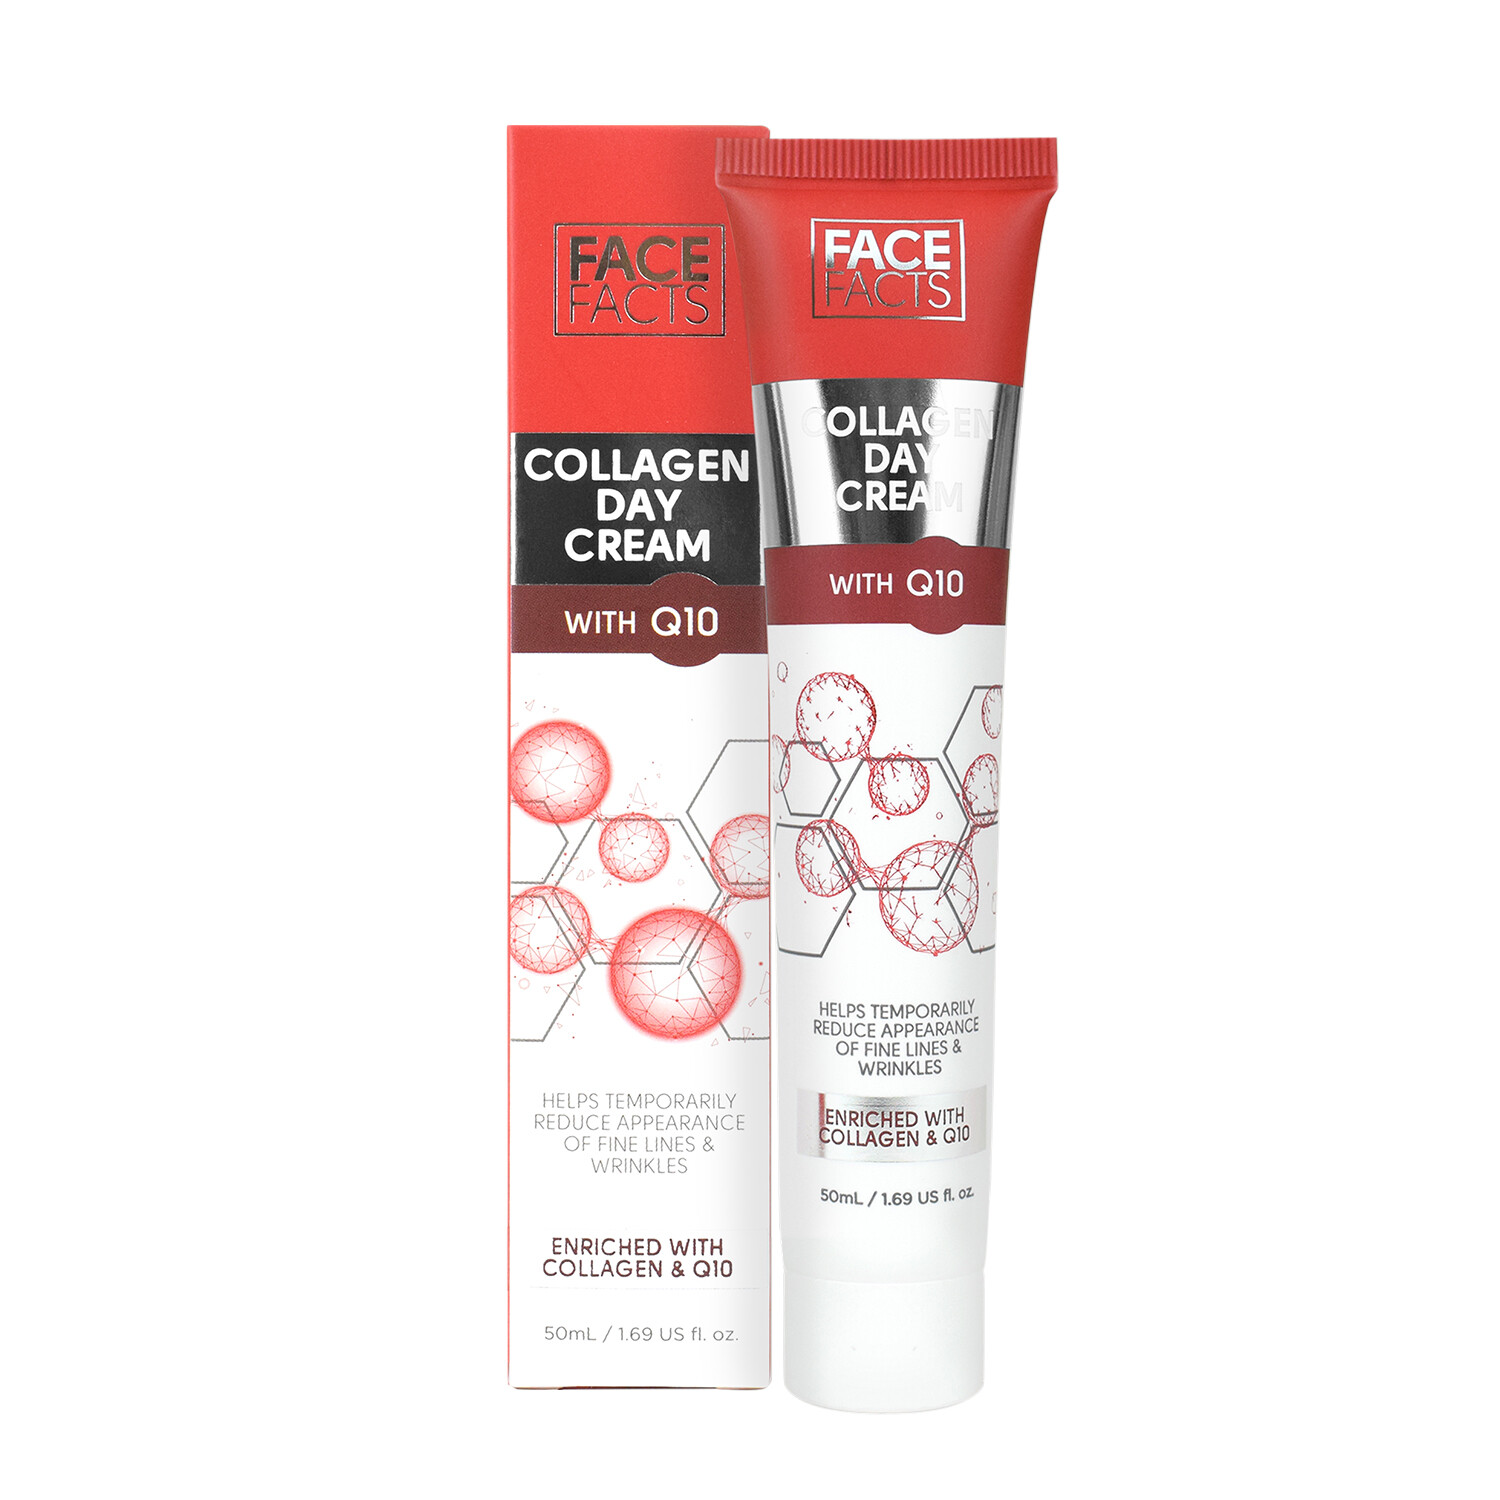 Face Facts Collagen Q10 Day Cream Image